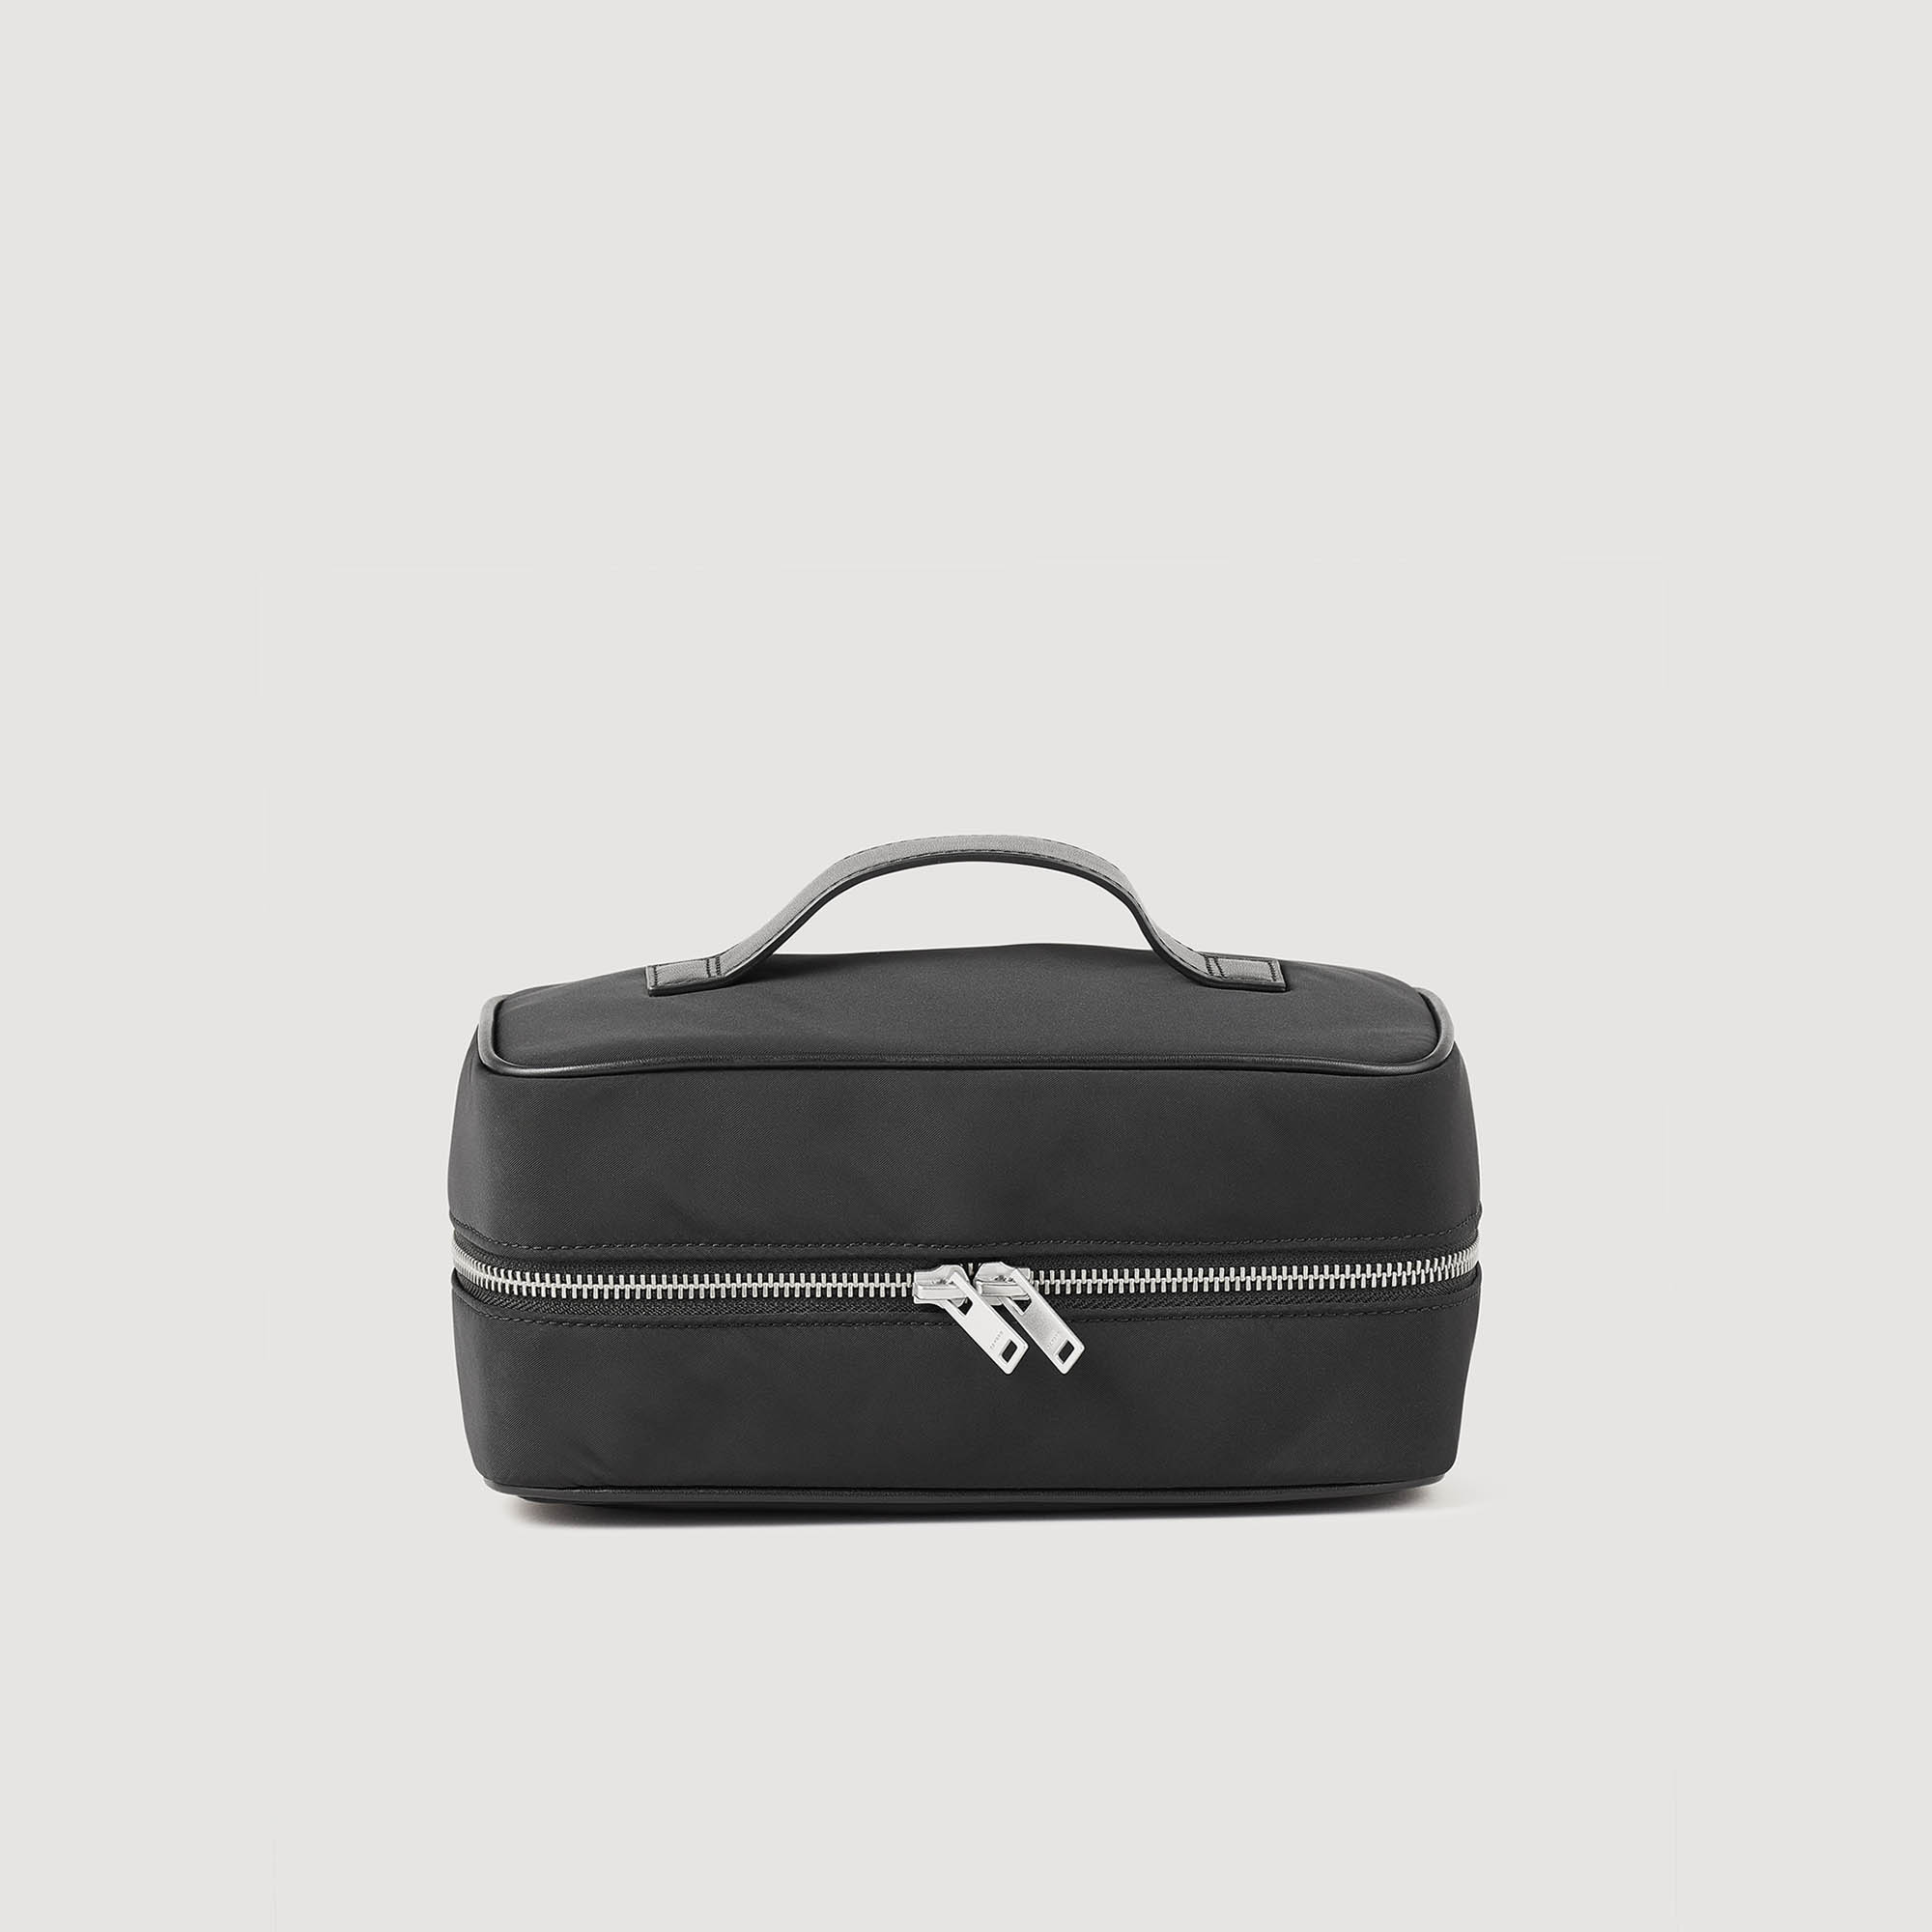 Sandro polyester Lining: Nylon toiletry bag with zip fastening, leather handle on top, and technical fabric interior